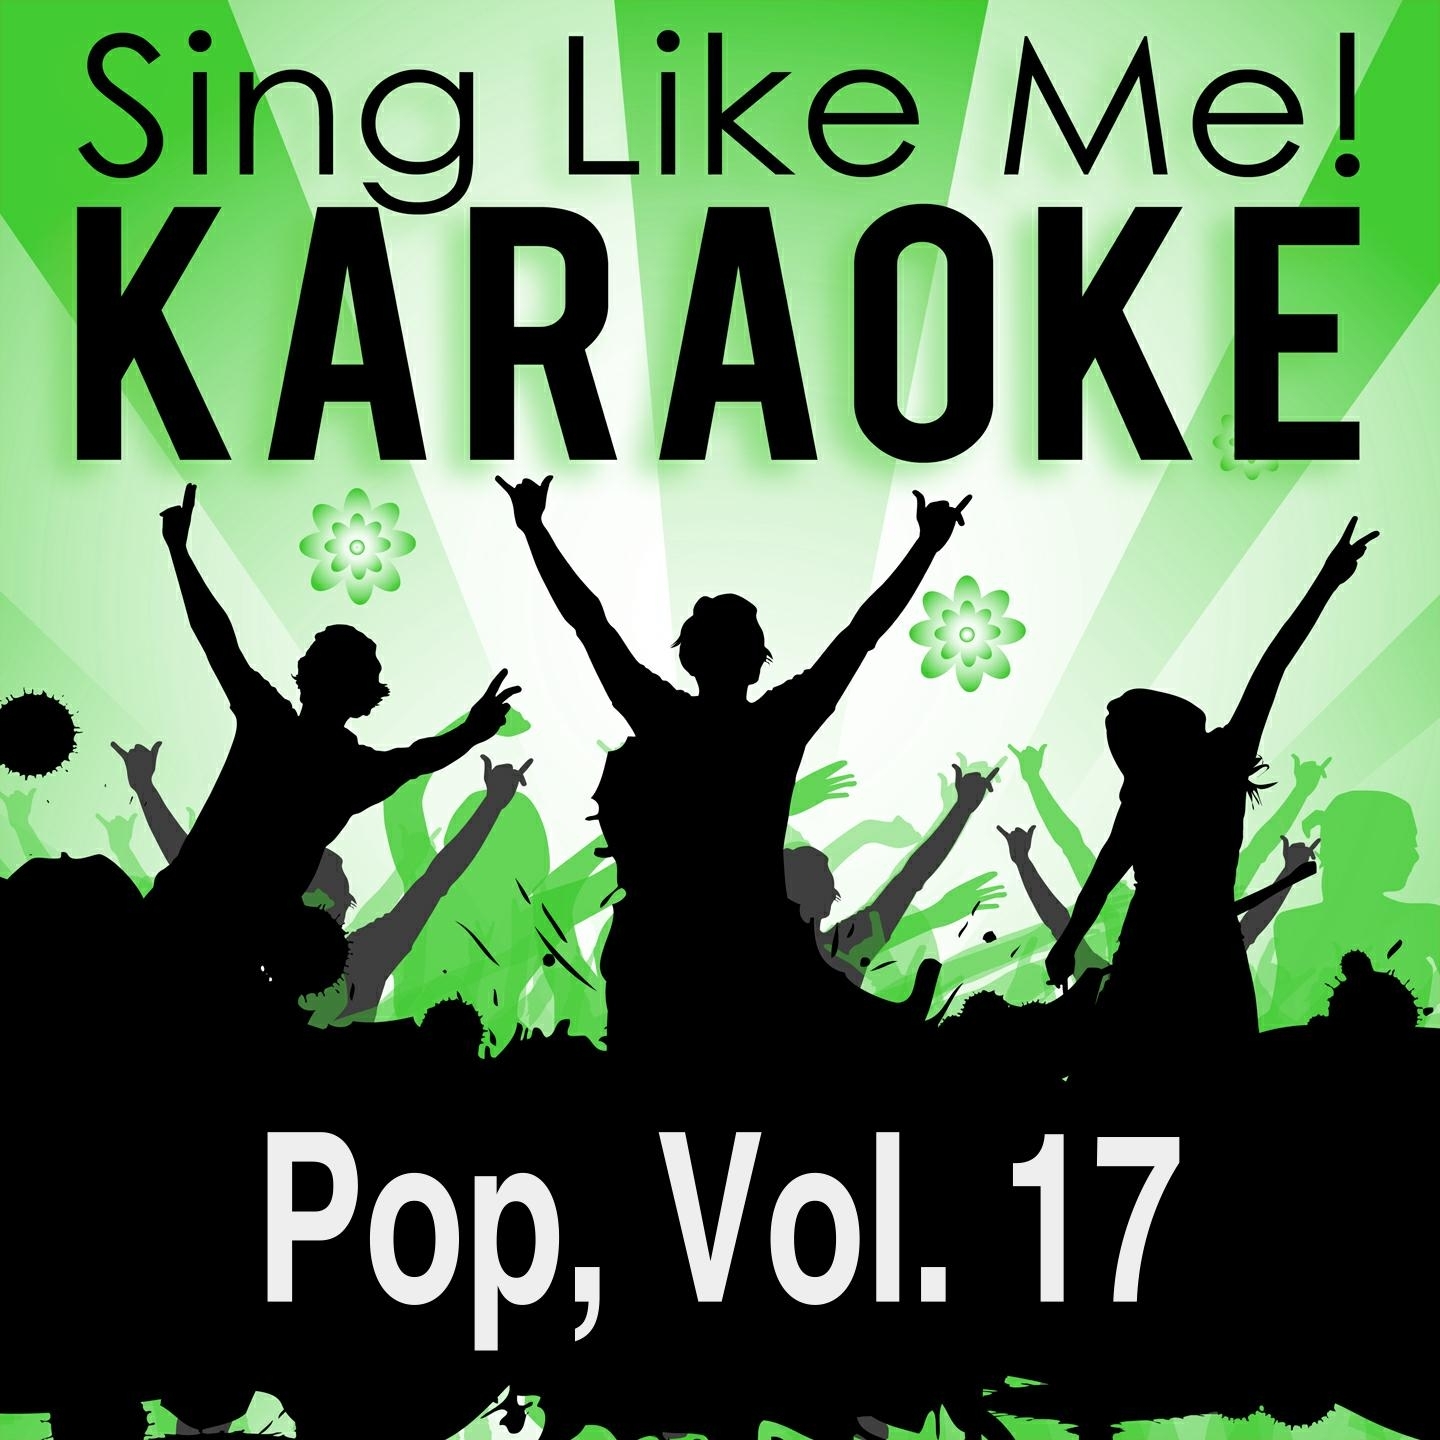 Lady of the Morning (Karaoke Version With Guide Melody) (Originally Performed By Marvin, Welch & Farrar)